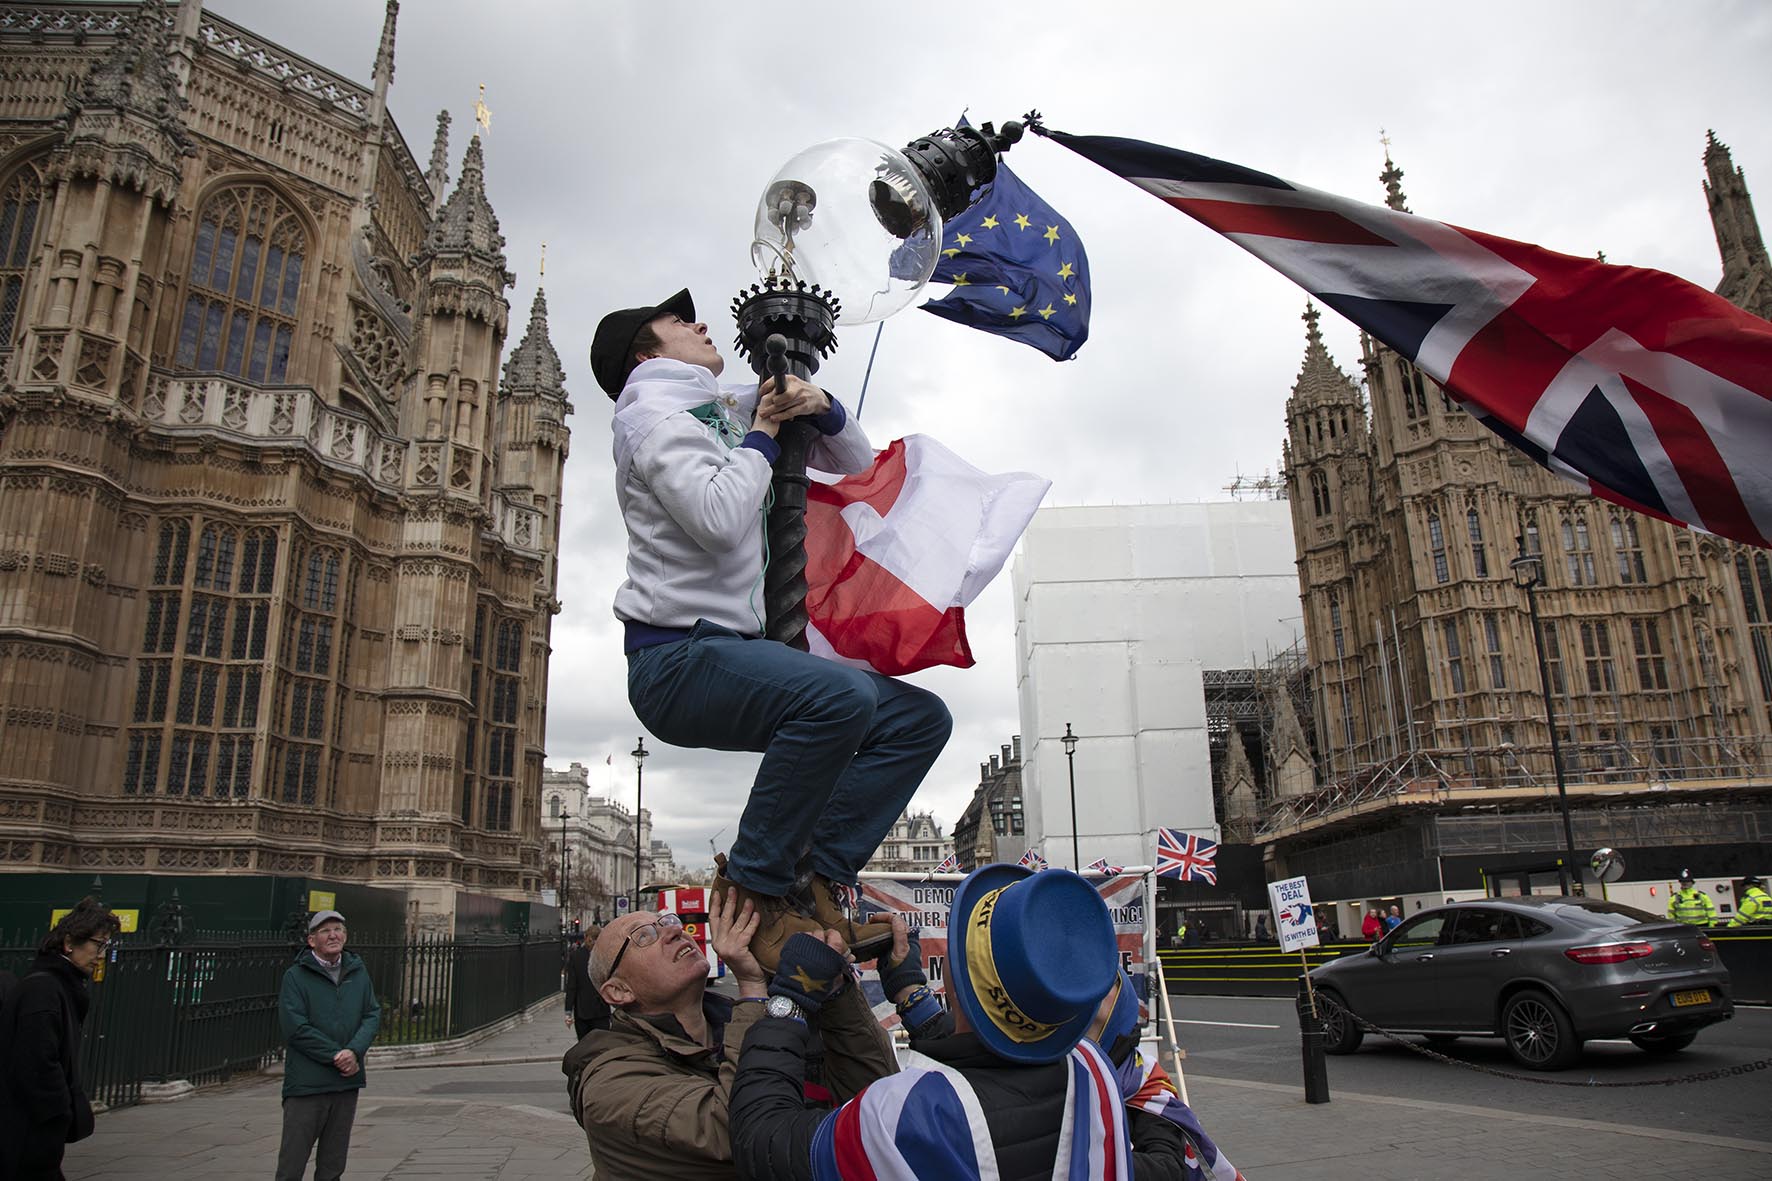  Brexit protesters attempt to rescue a falling street lamp in a scene reminiscent of Raising the Flag on Iwo Jima, the iconic photograph taken by Joe Rosenthal, in Westminster on 4th April 2019. 